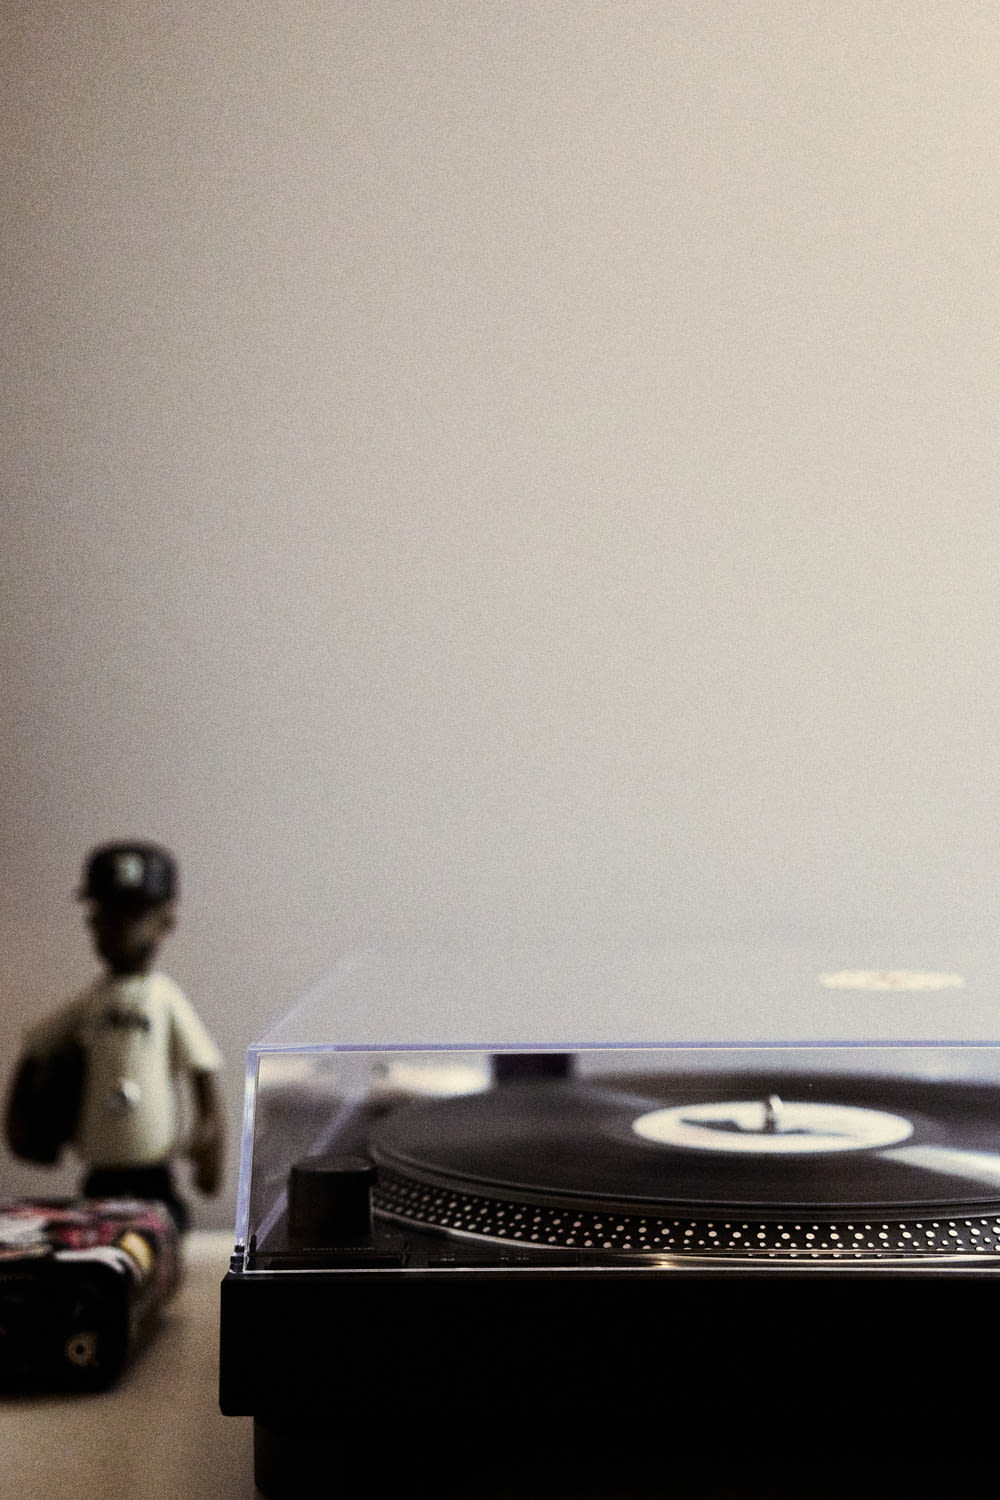 a record player sitting next to a figurine on a table